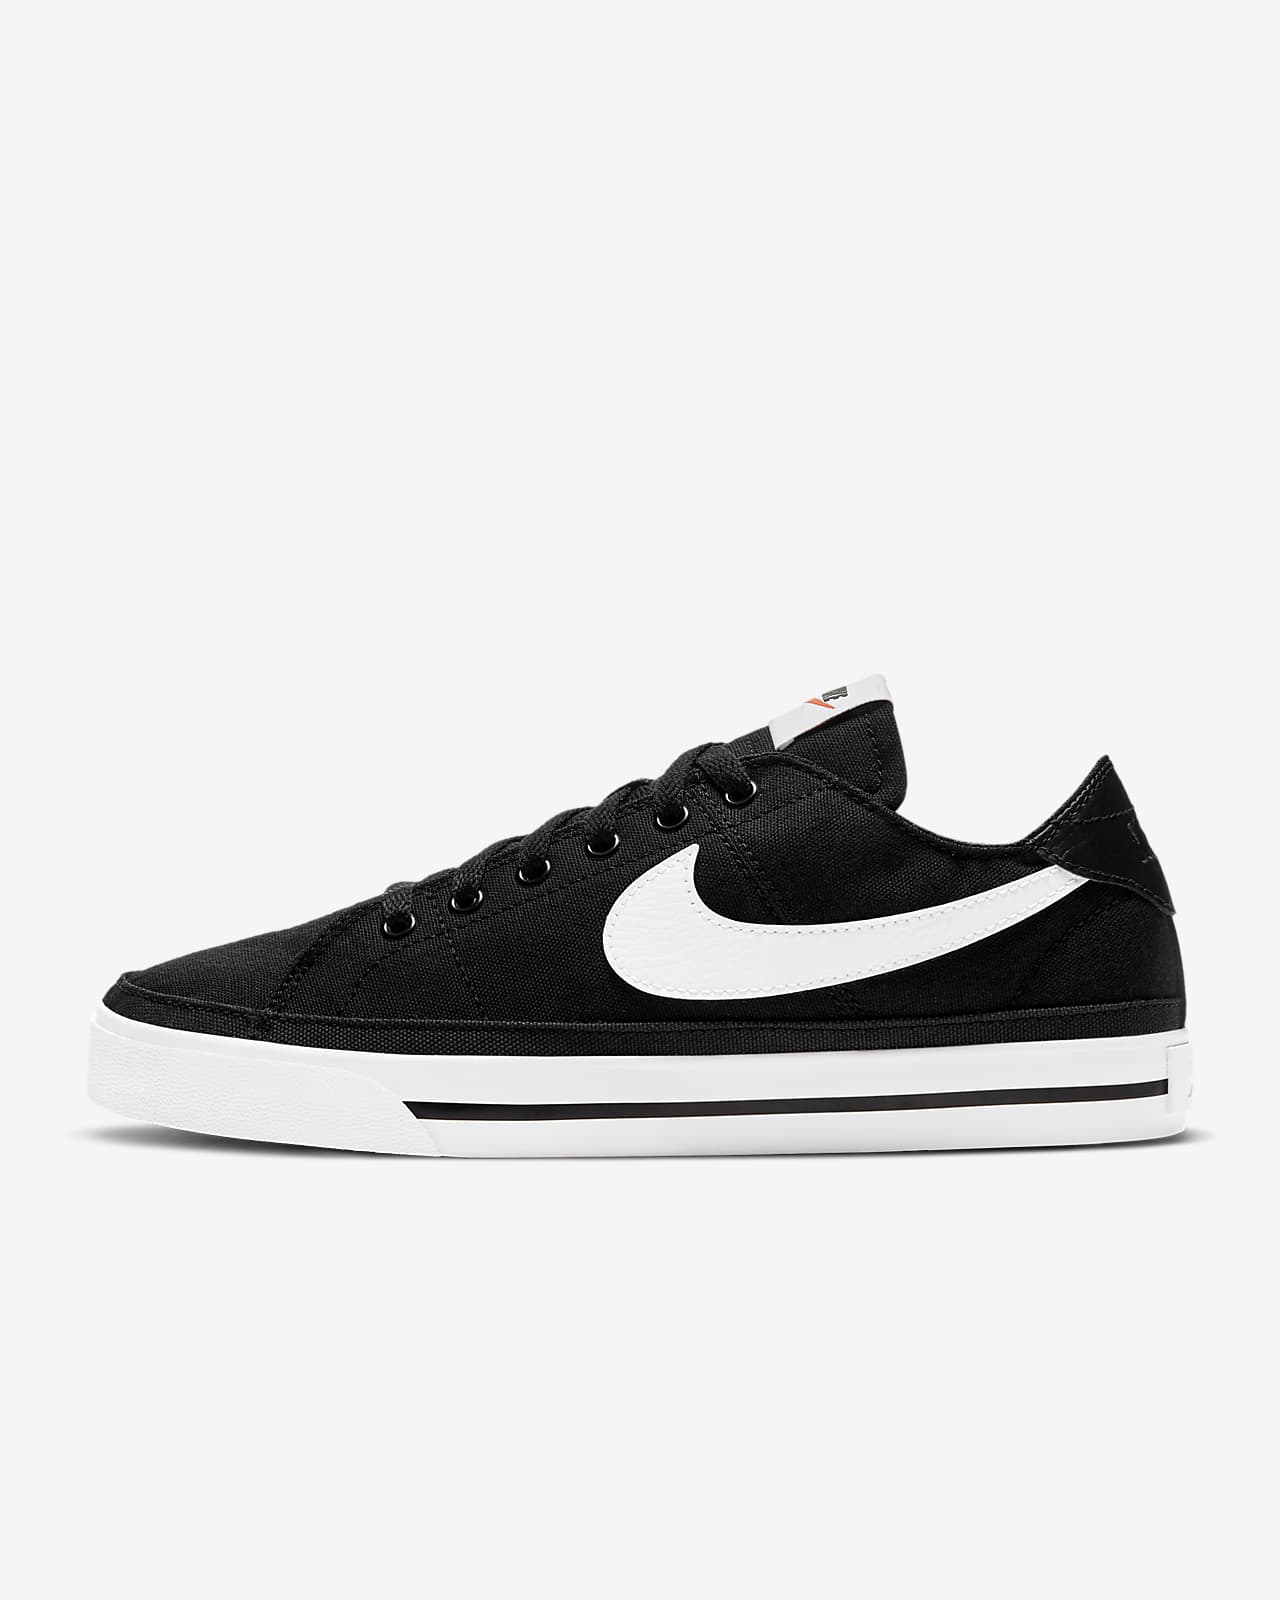 nike women's shoes white and black